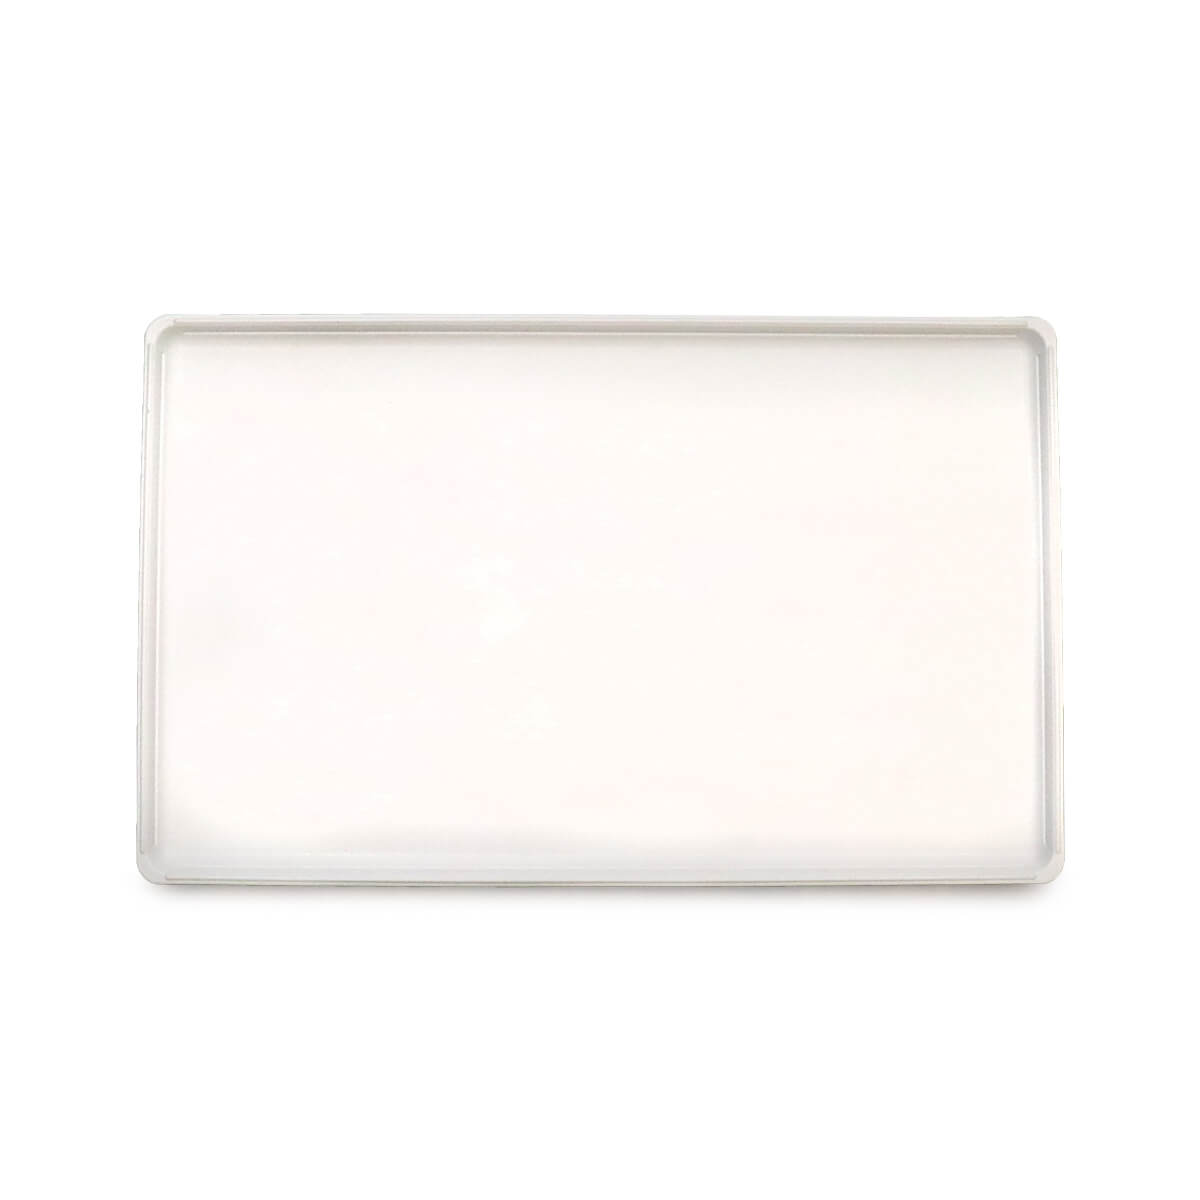 Top view of a white replacement pan.